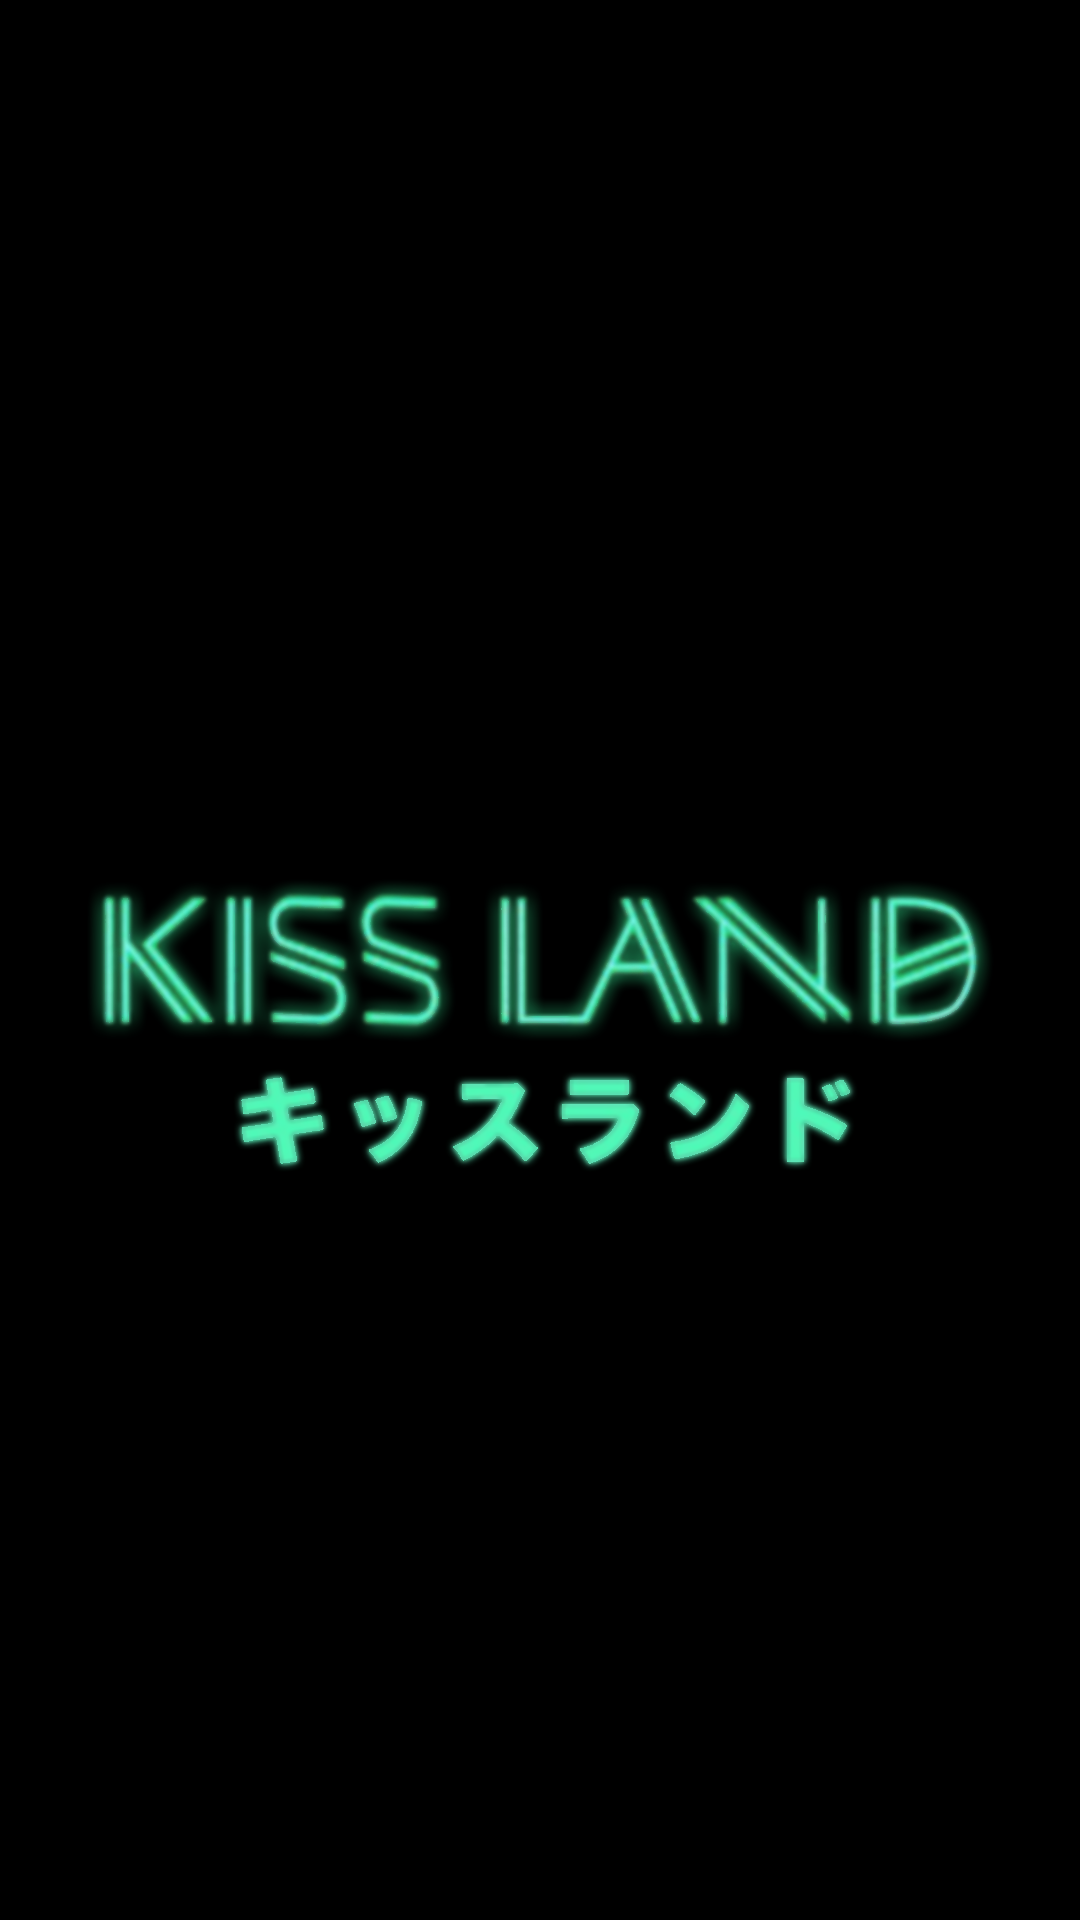 The Weeknd Kiss Land Wallpapers.